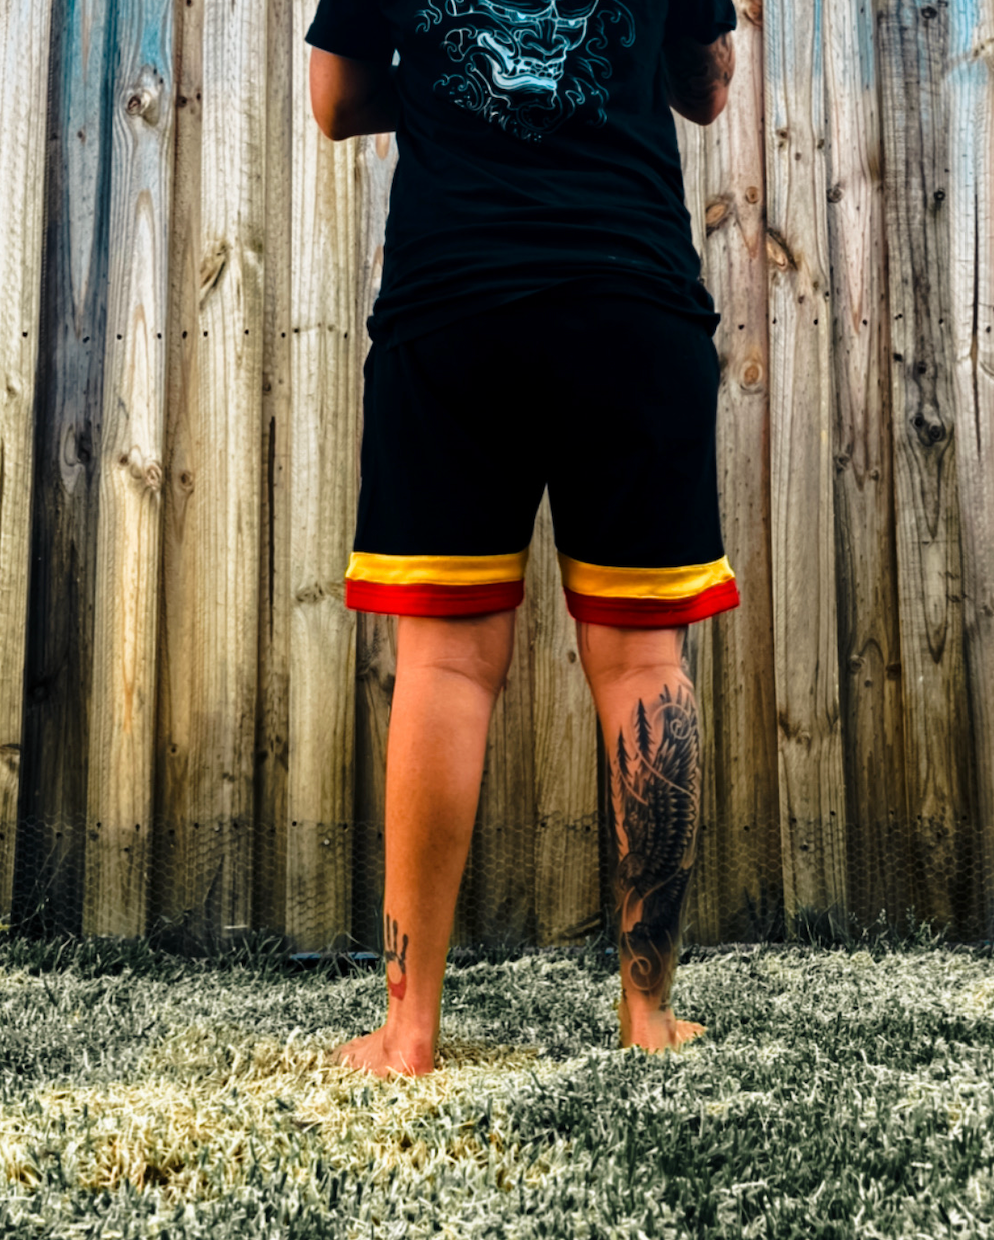 First Nations Trackie Shorts